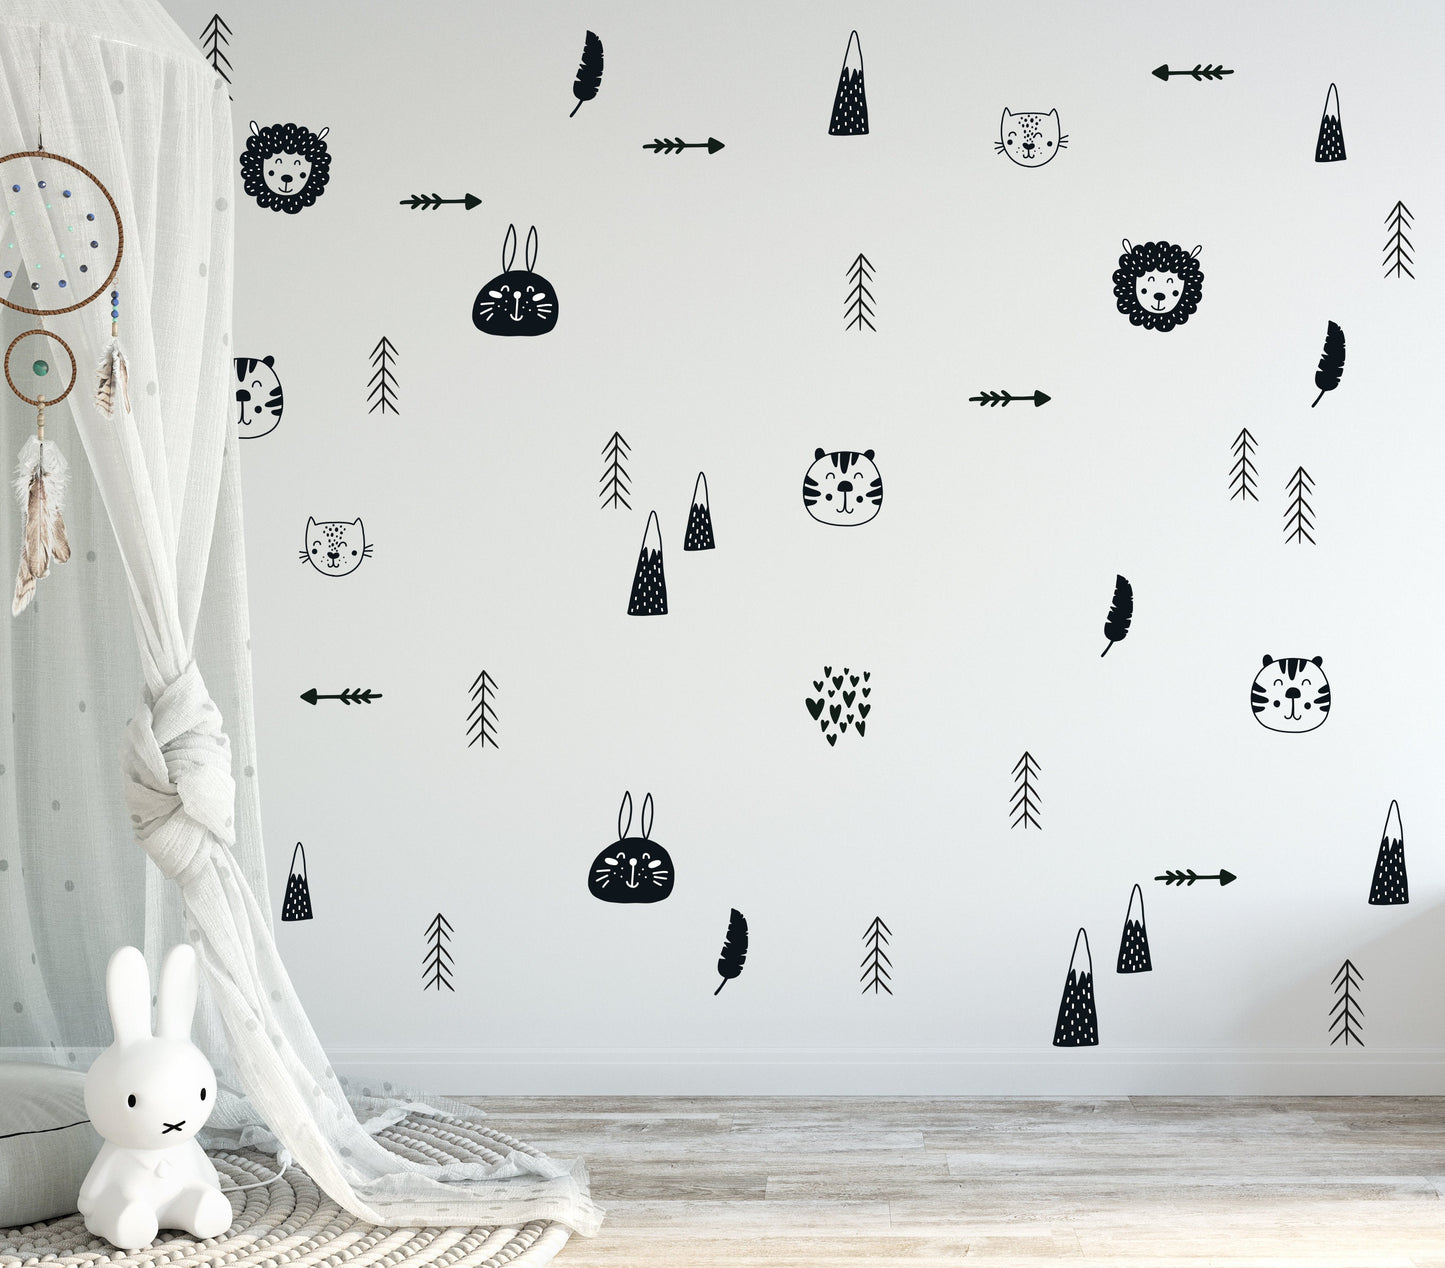 Scandinavian Wall Decor Decals For Kids Rooms Nursery Scandi Wall Art Vinyl Wall Stickers For Childrens Bedroom Baby Room Balck & White